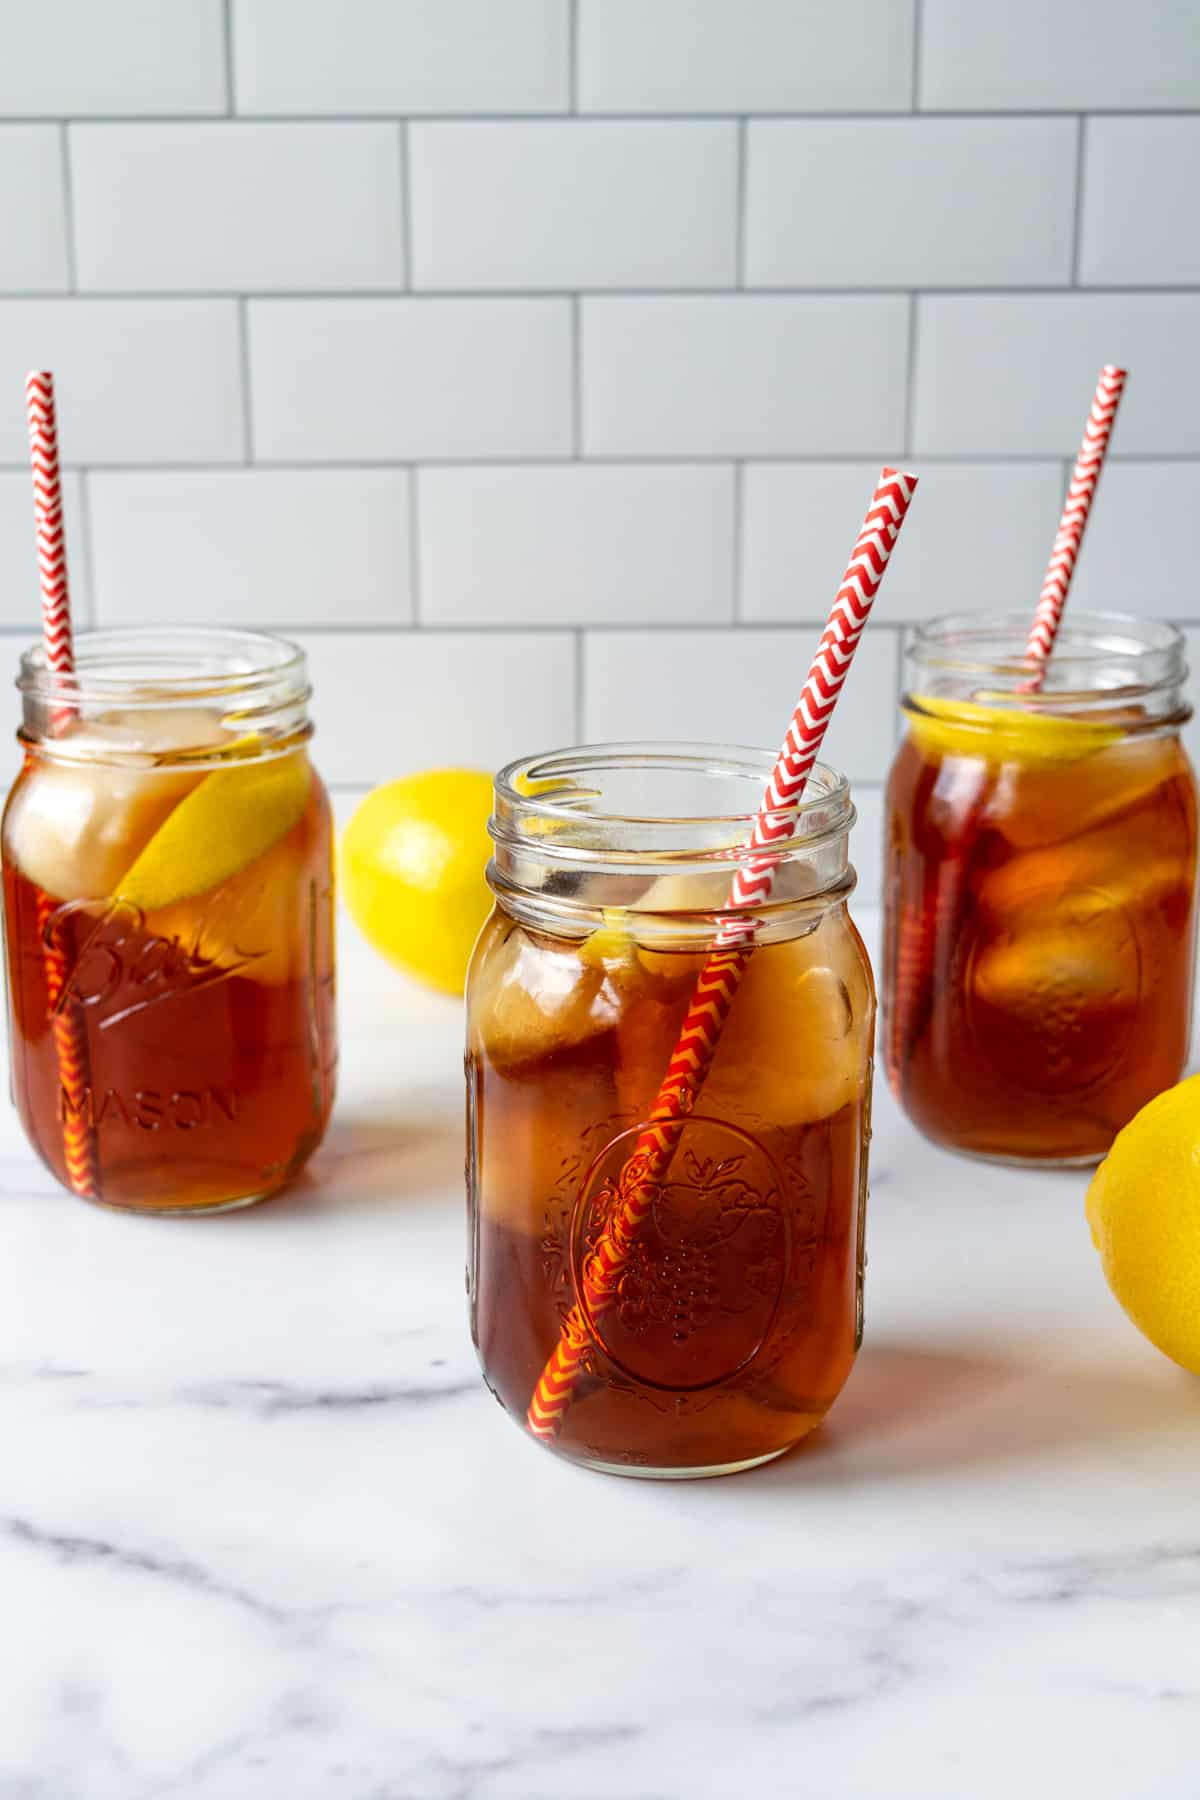 3 glasses of Earl Grey Iced Tea with red and white straws.